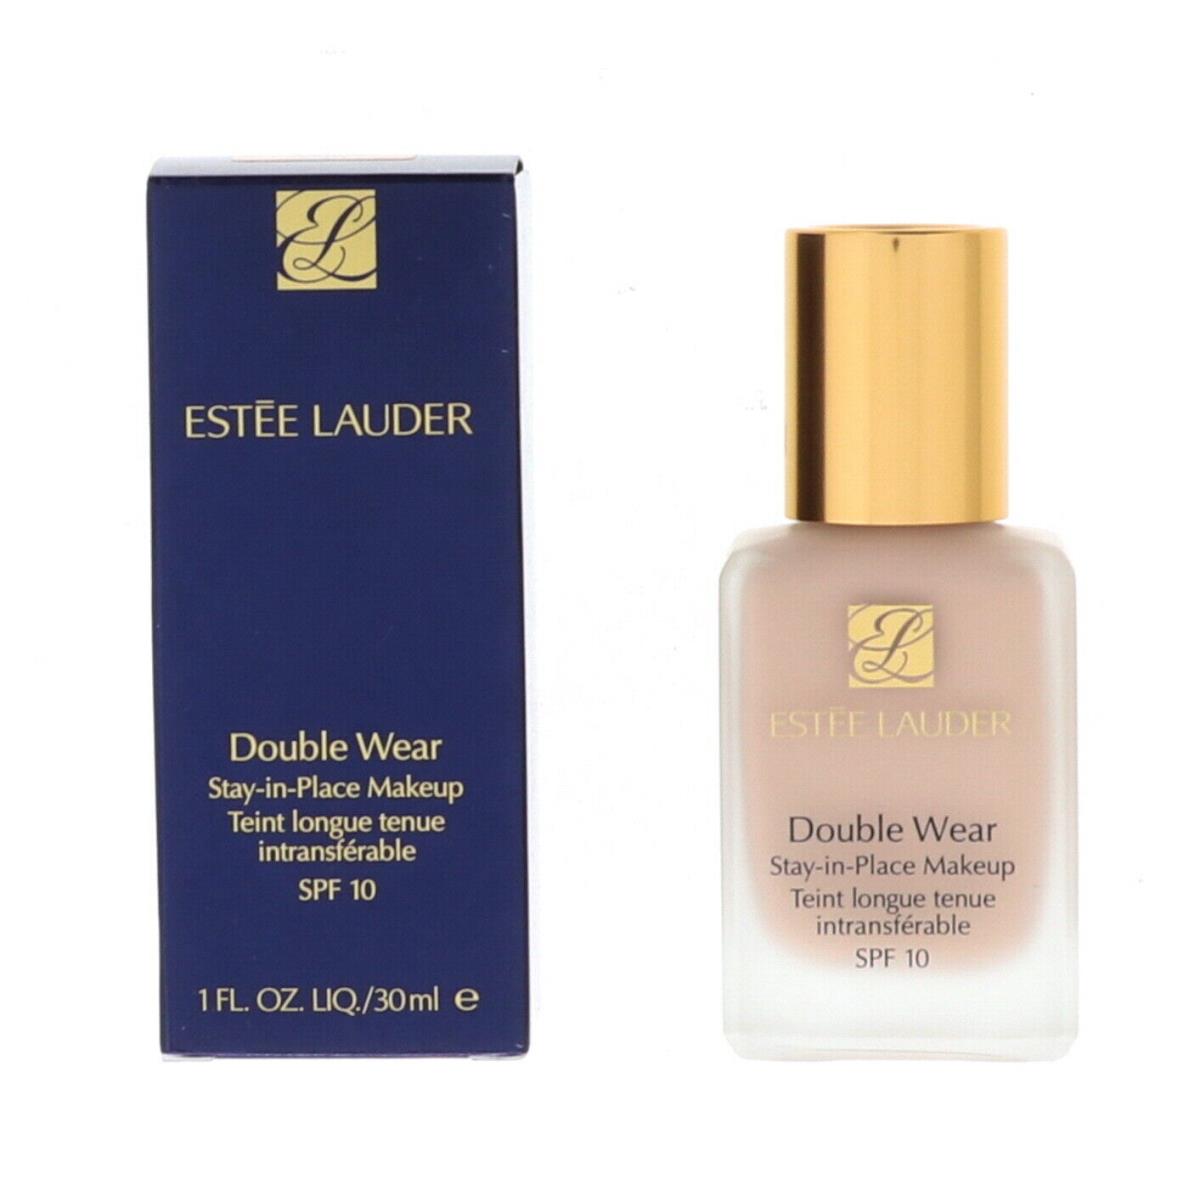 Estee Lauder Double Wear Stay-in-place Makeup 1C0 Shell 1 oz